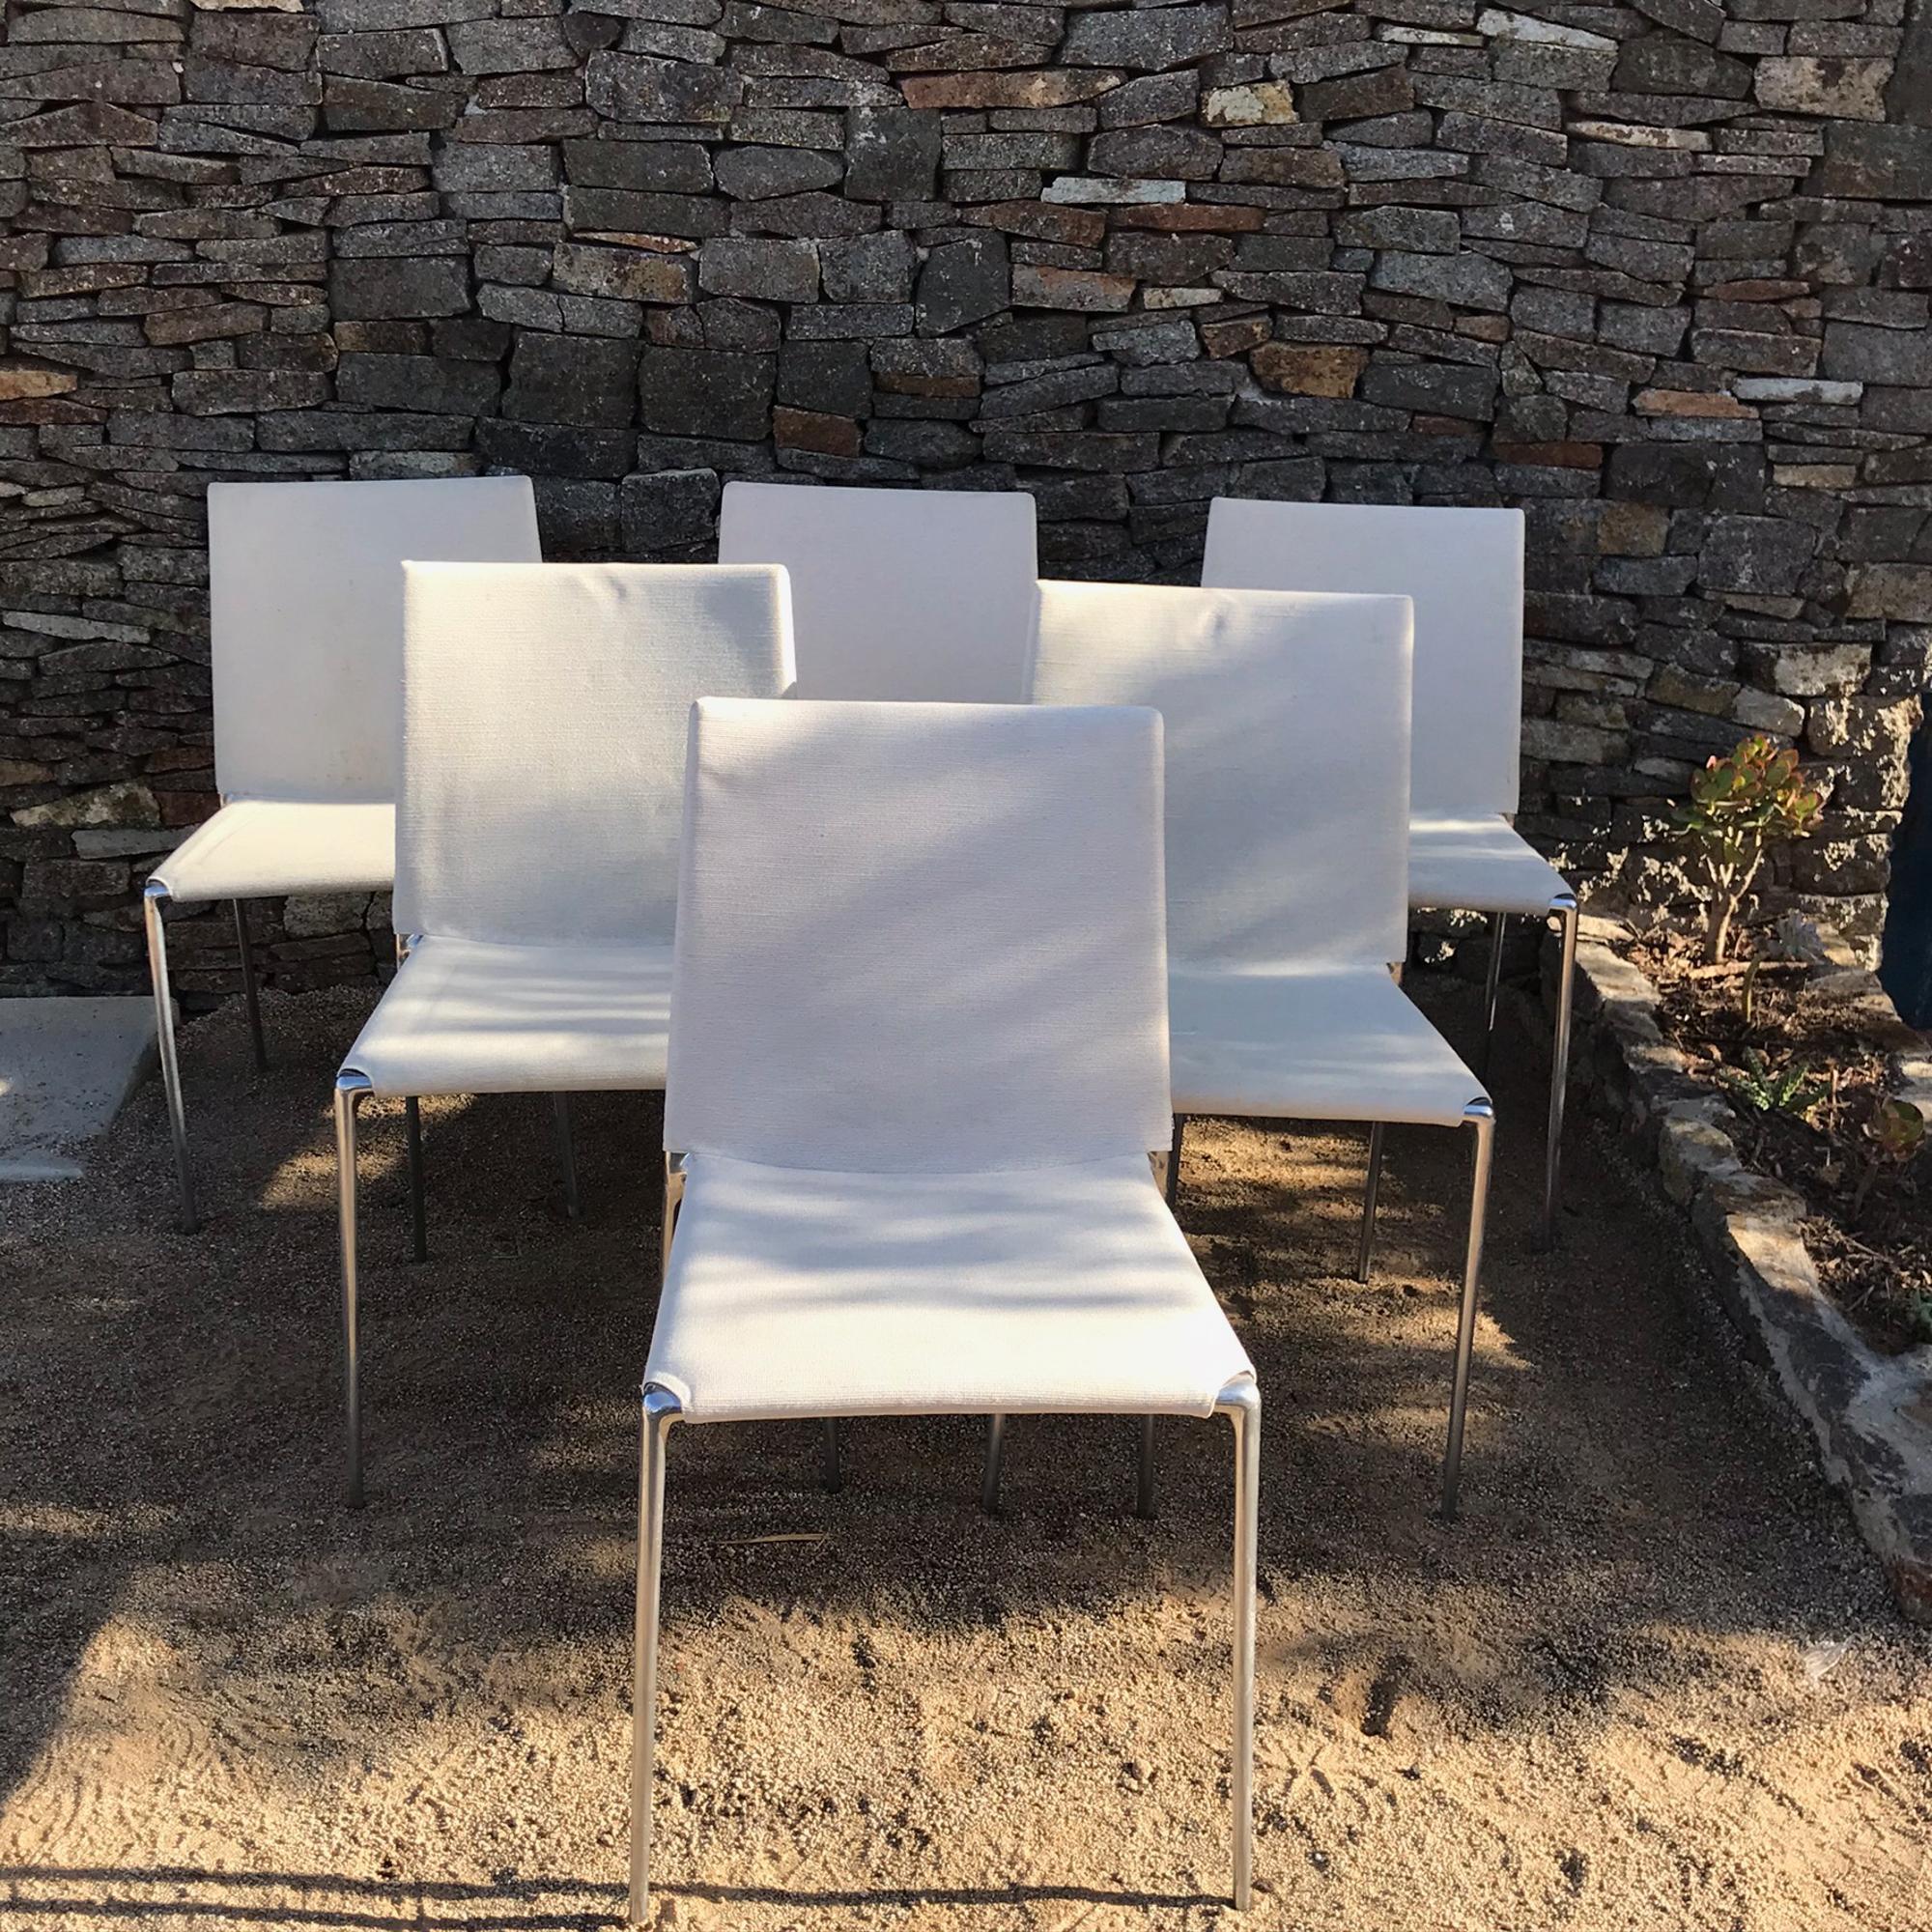 B&B Italia stacking set of six simply modern ALMA dining chairs in white with chrome designed by Roberto Barbieri for B&B Italia.
Made and stamped in Italy. Fabulous feature of being stackable. Modern flexibility.
Dimensions: 32